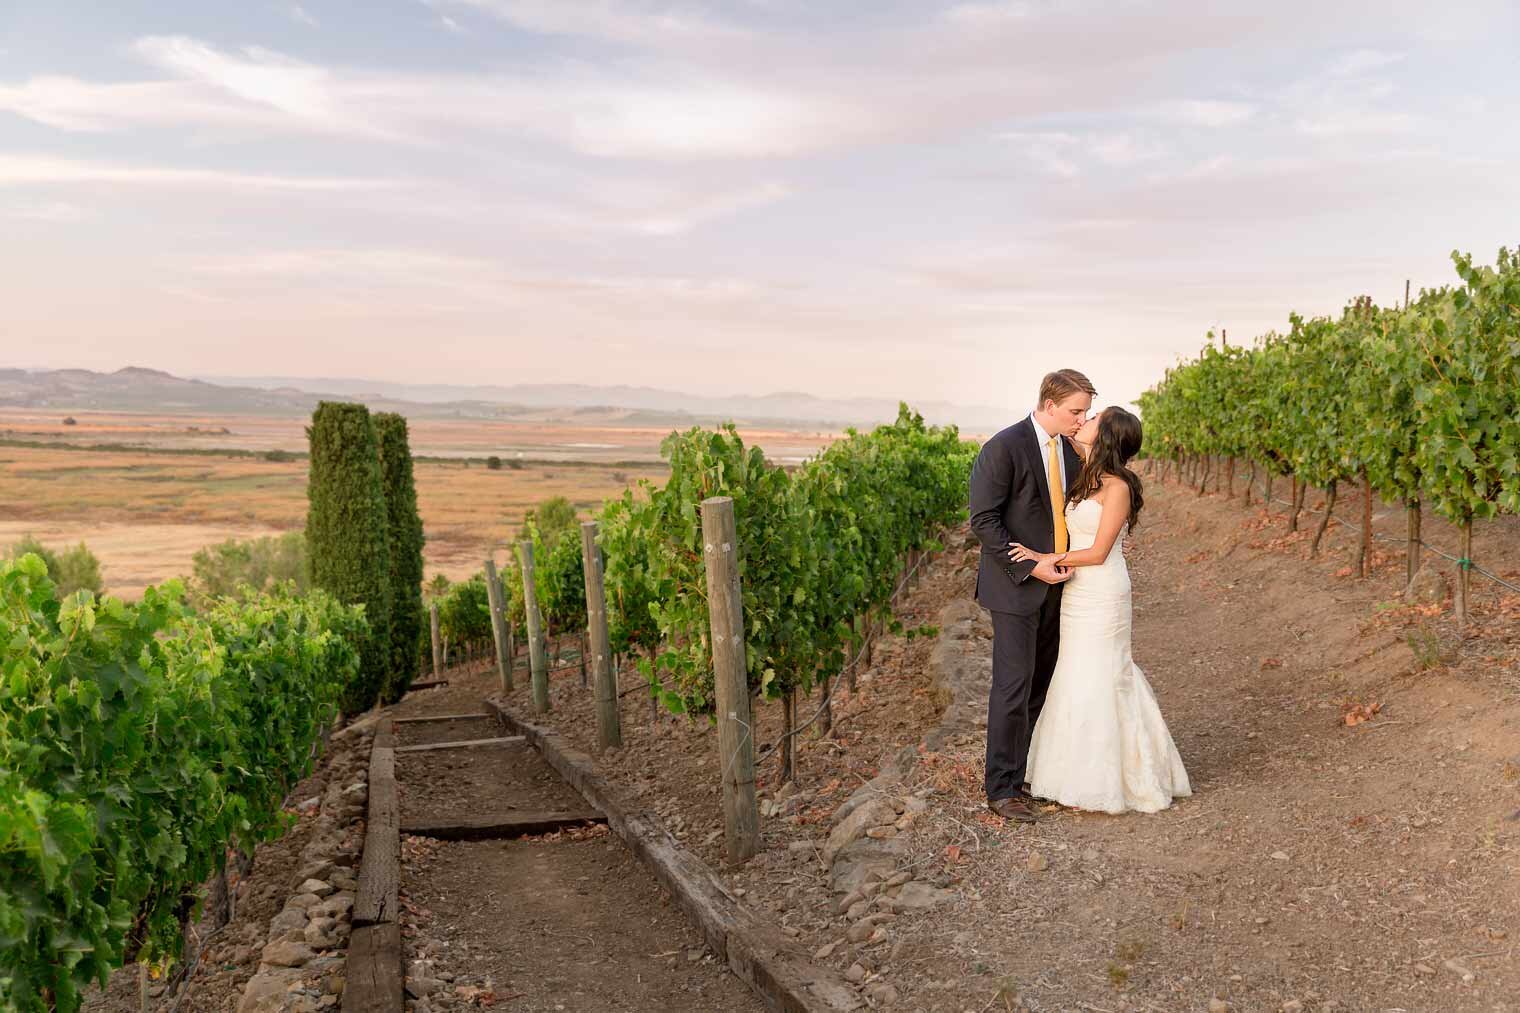 A photo from a wedding at the Viansa Winery in Napa/Sonoma Valley, California